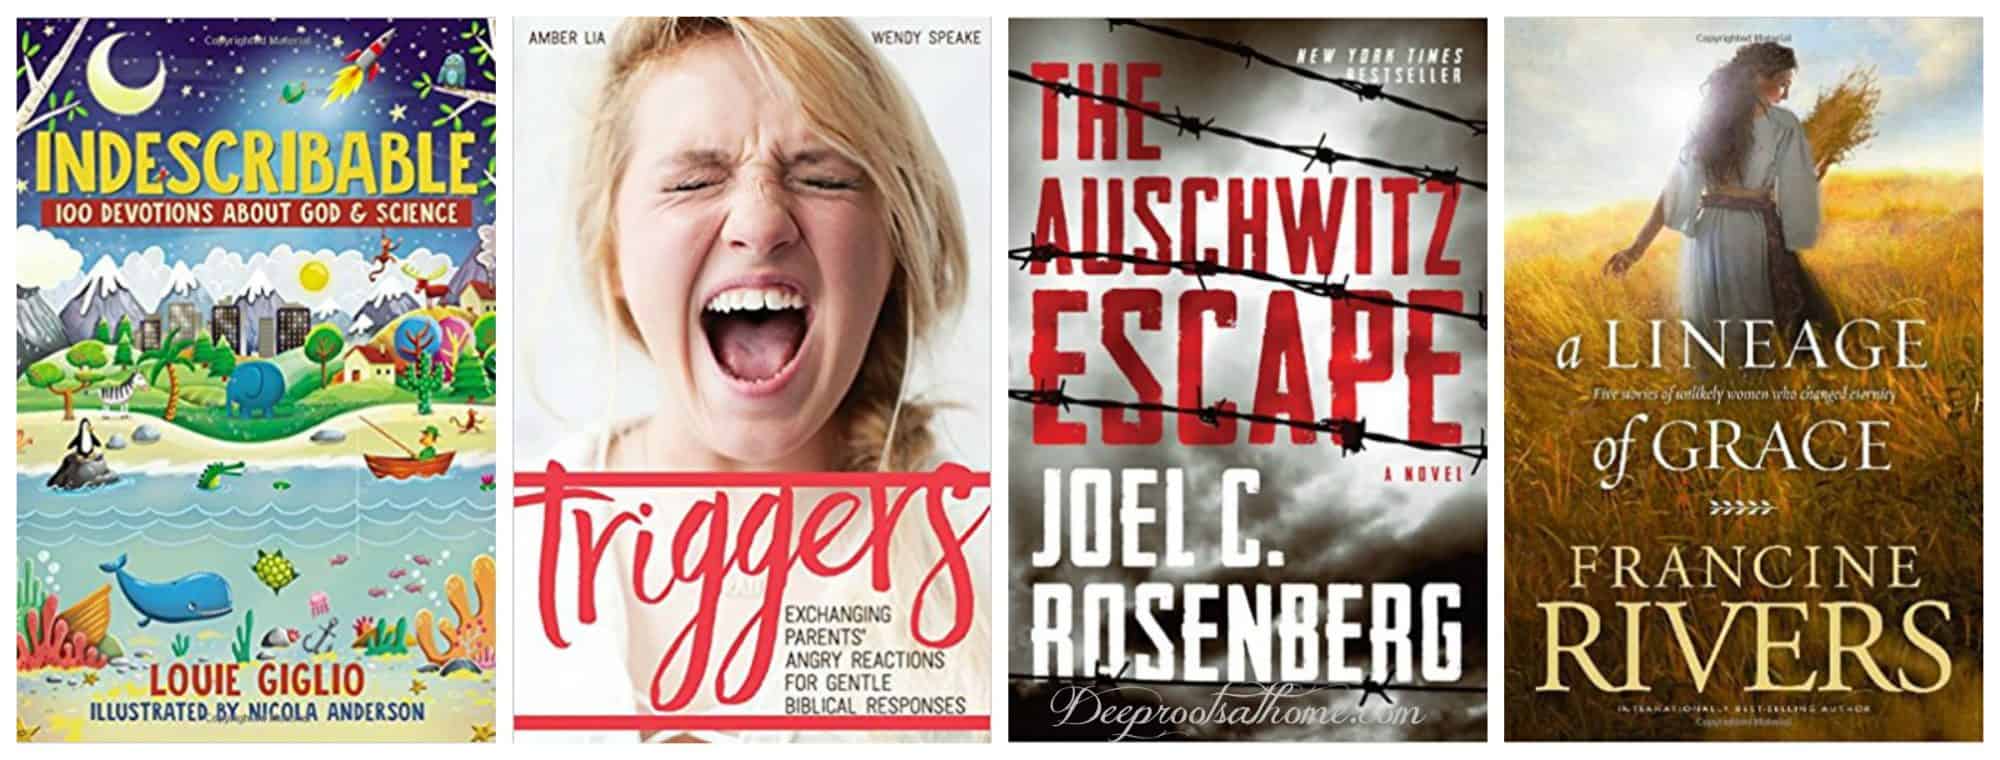 Summer Reading List: New and {Worthy To Be Revisited} Older Books. 4 book covers: The Auschwitz Escape by Joel C. Rosenberg; Indescribable: 100 Devotions for Kids by Louie Giglio; Triggers, Parents' Angry Reactions, Gentle Biblical Responses by Amber Lia and Lineage of Grace by Francine Rivers.